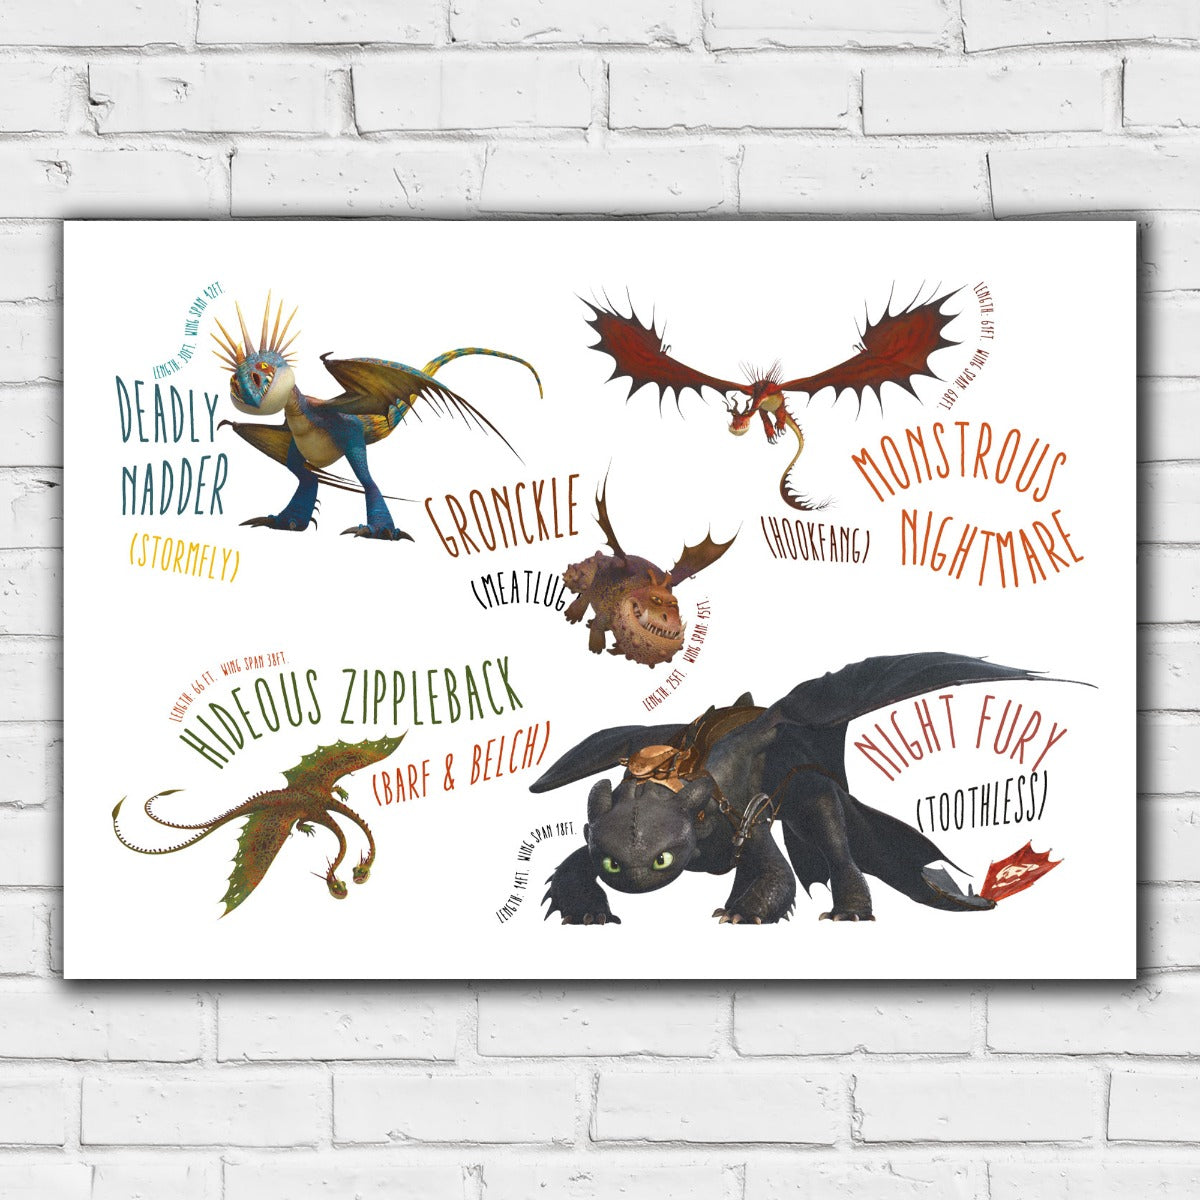 How To Train Your Dragon Print - Dragons and Info Poster Wall Art